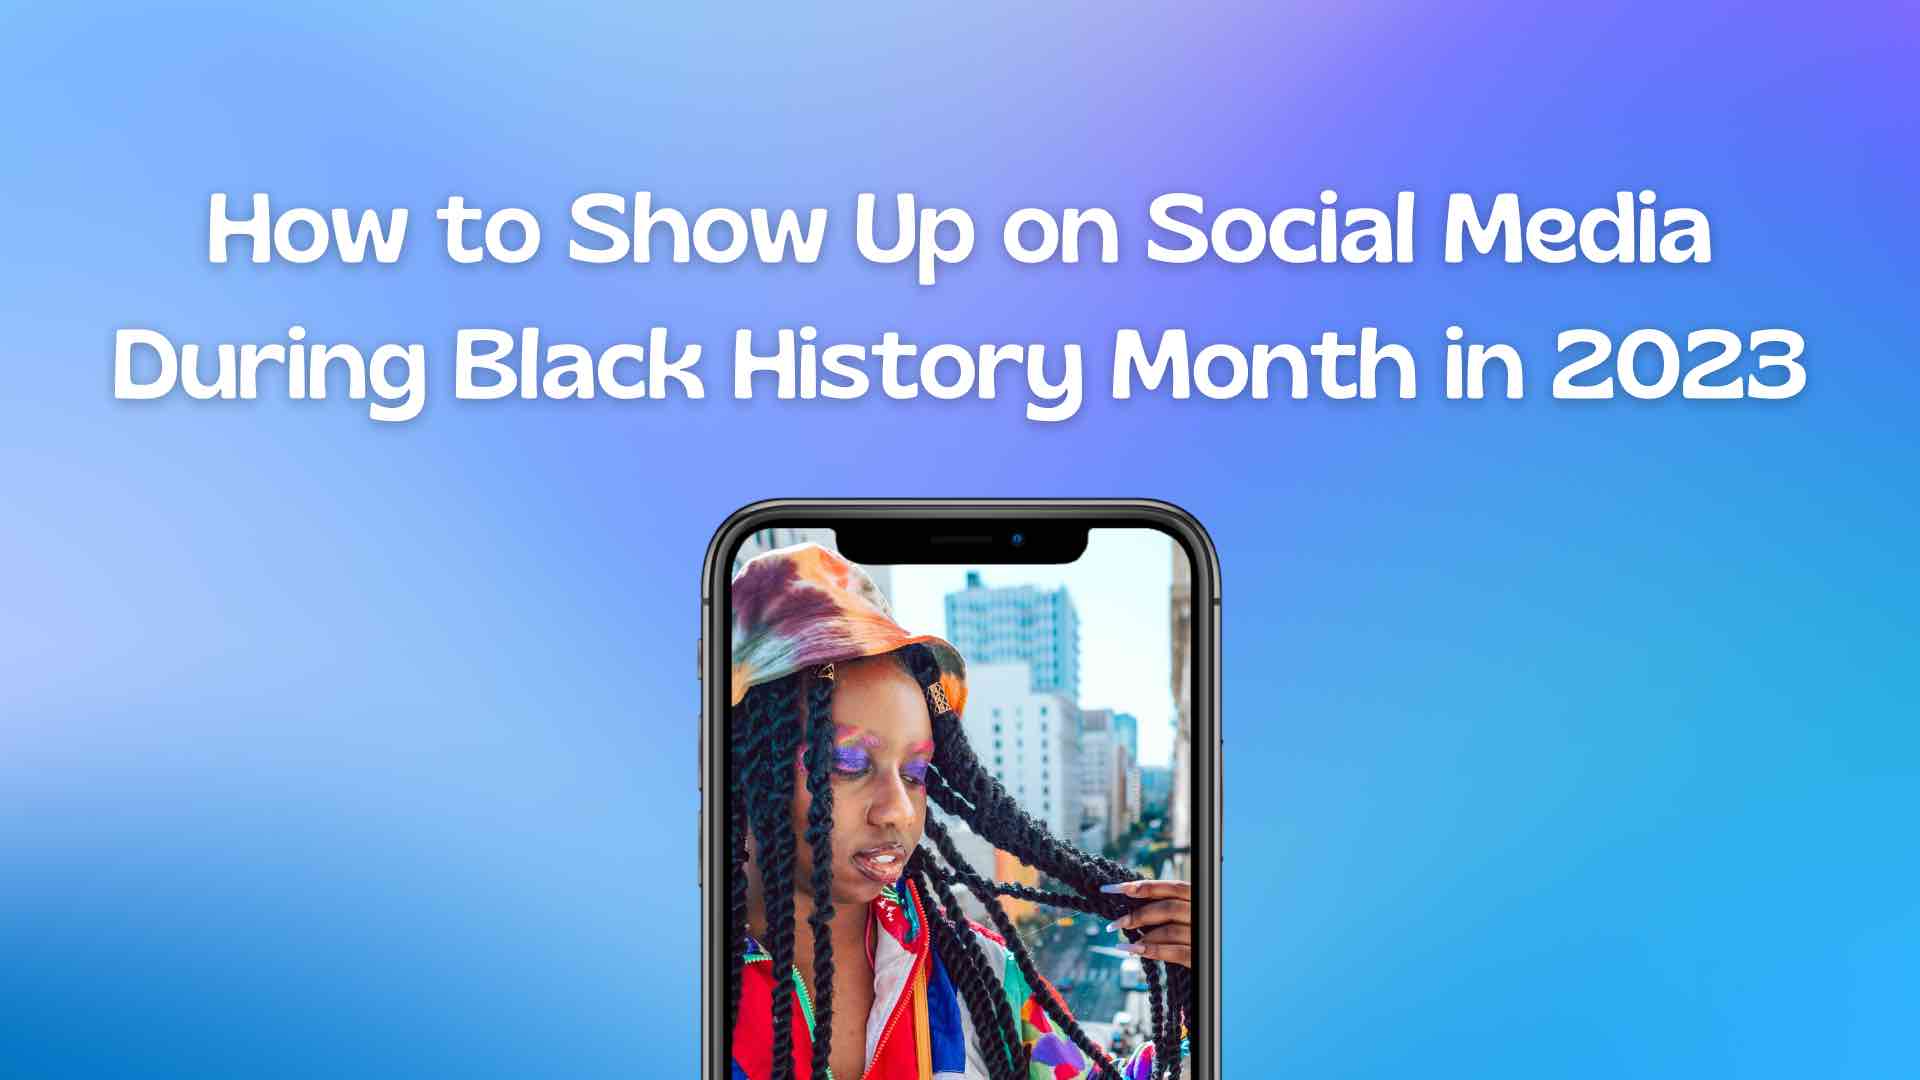 How to Celebrate Black History Month on Social Media